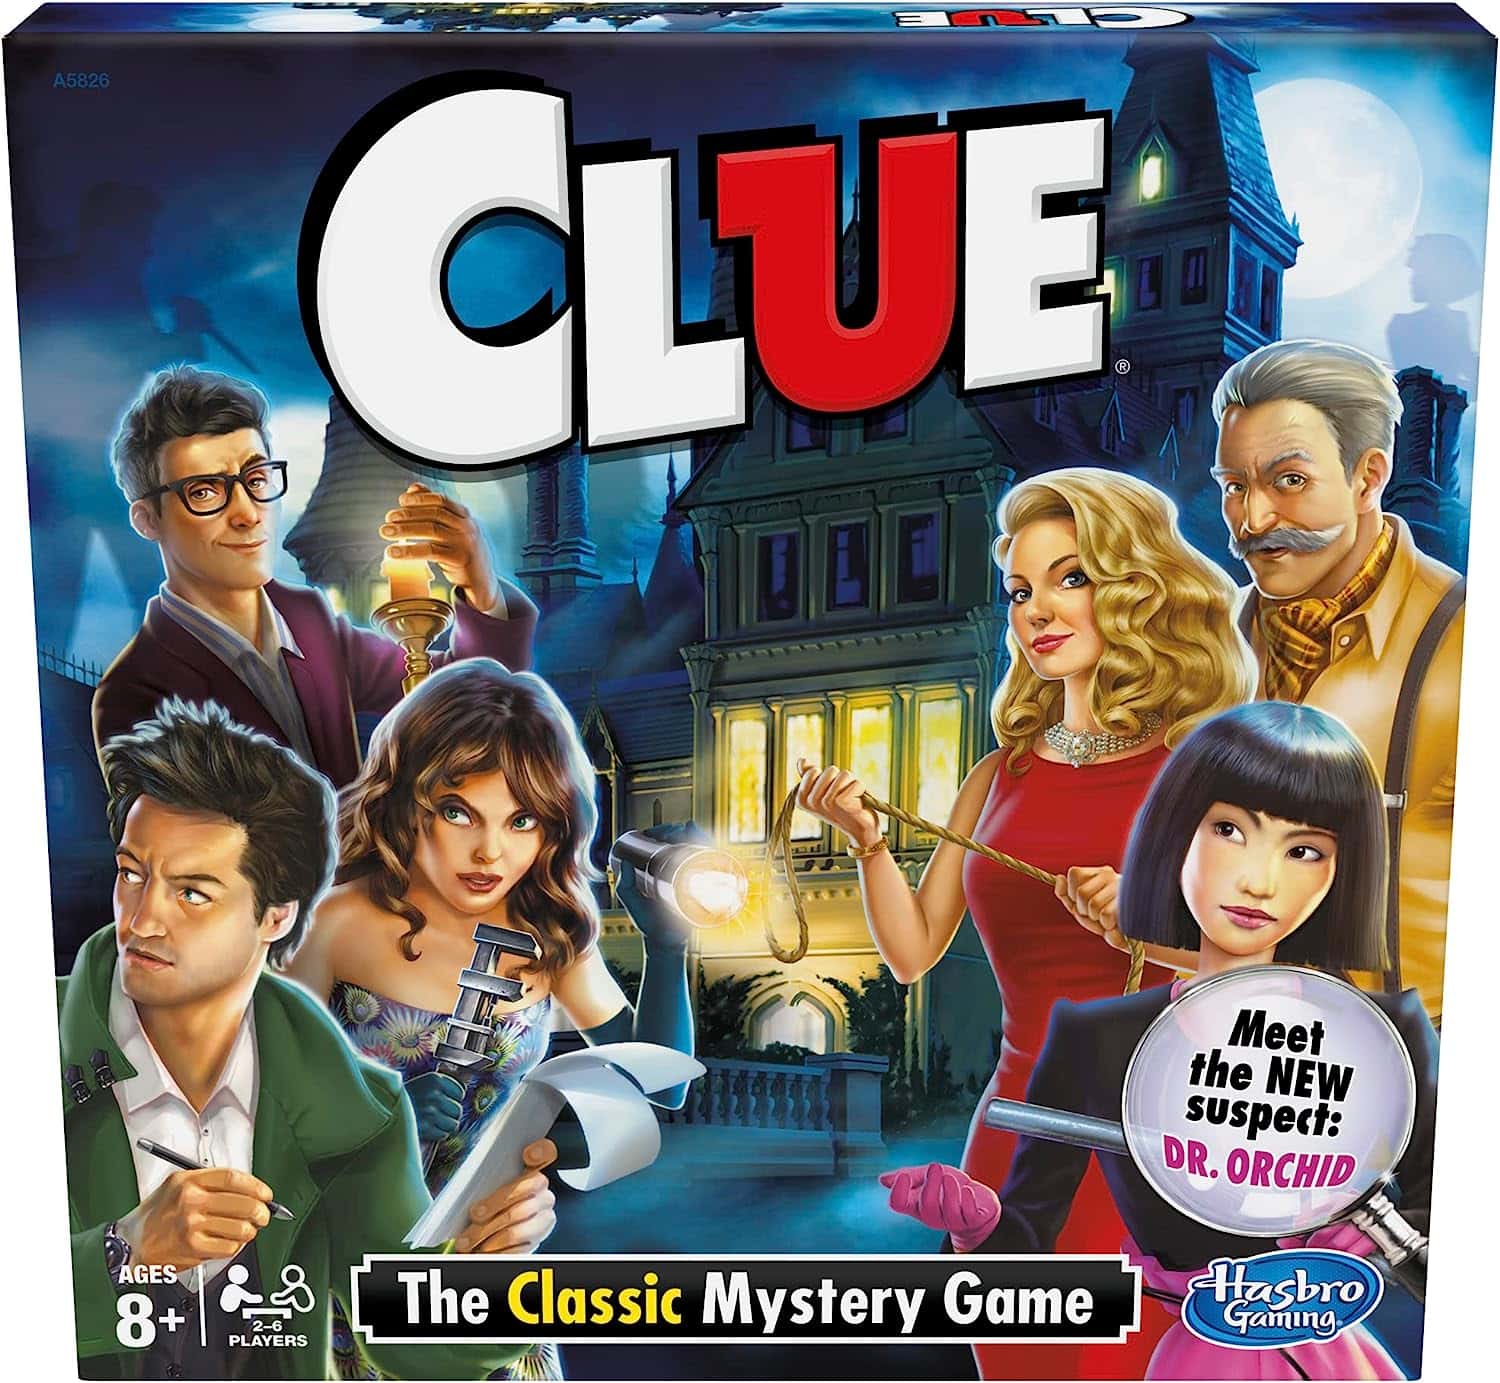 The board game Clue